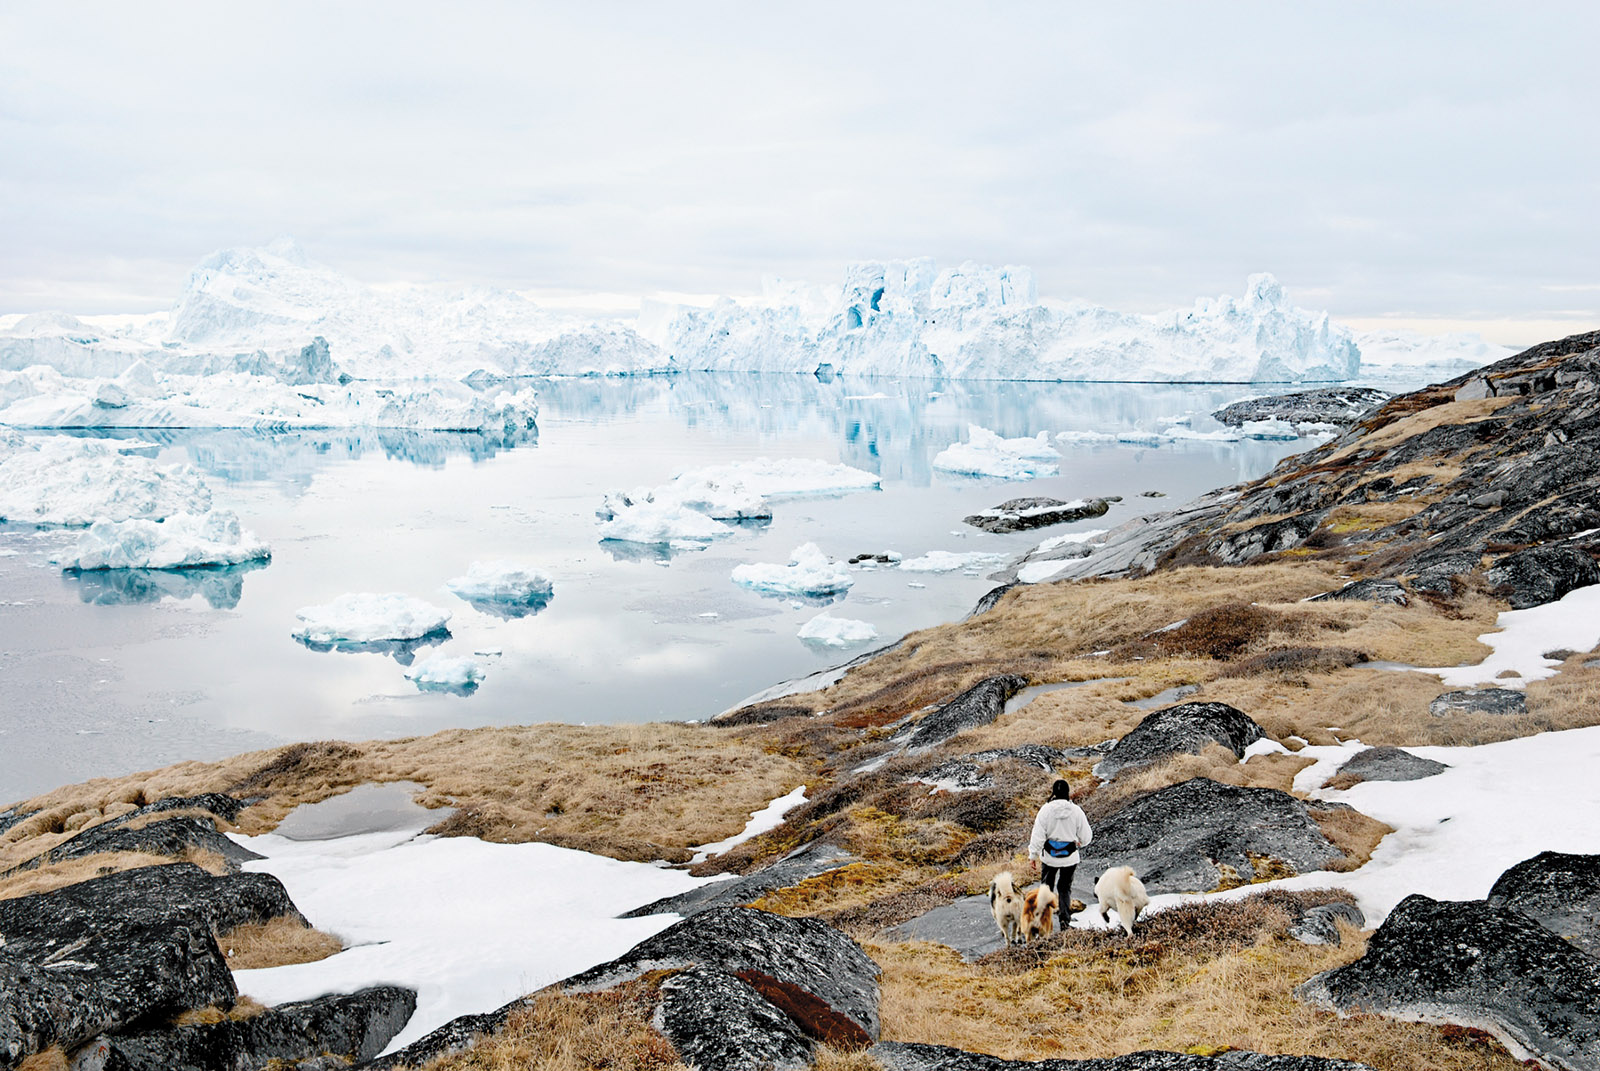 Icebergs off the coast of Ilulissat, Greenland, 2007; photograph by Tiina Itkonen from her book Avannaa, published by Kehrer in 2014